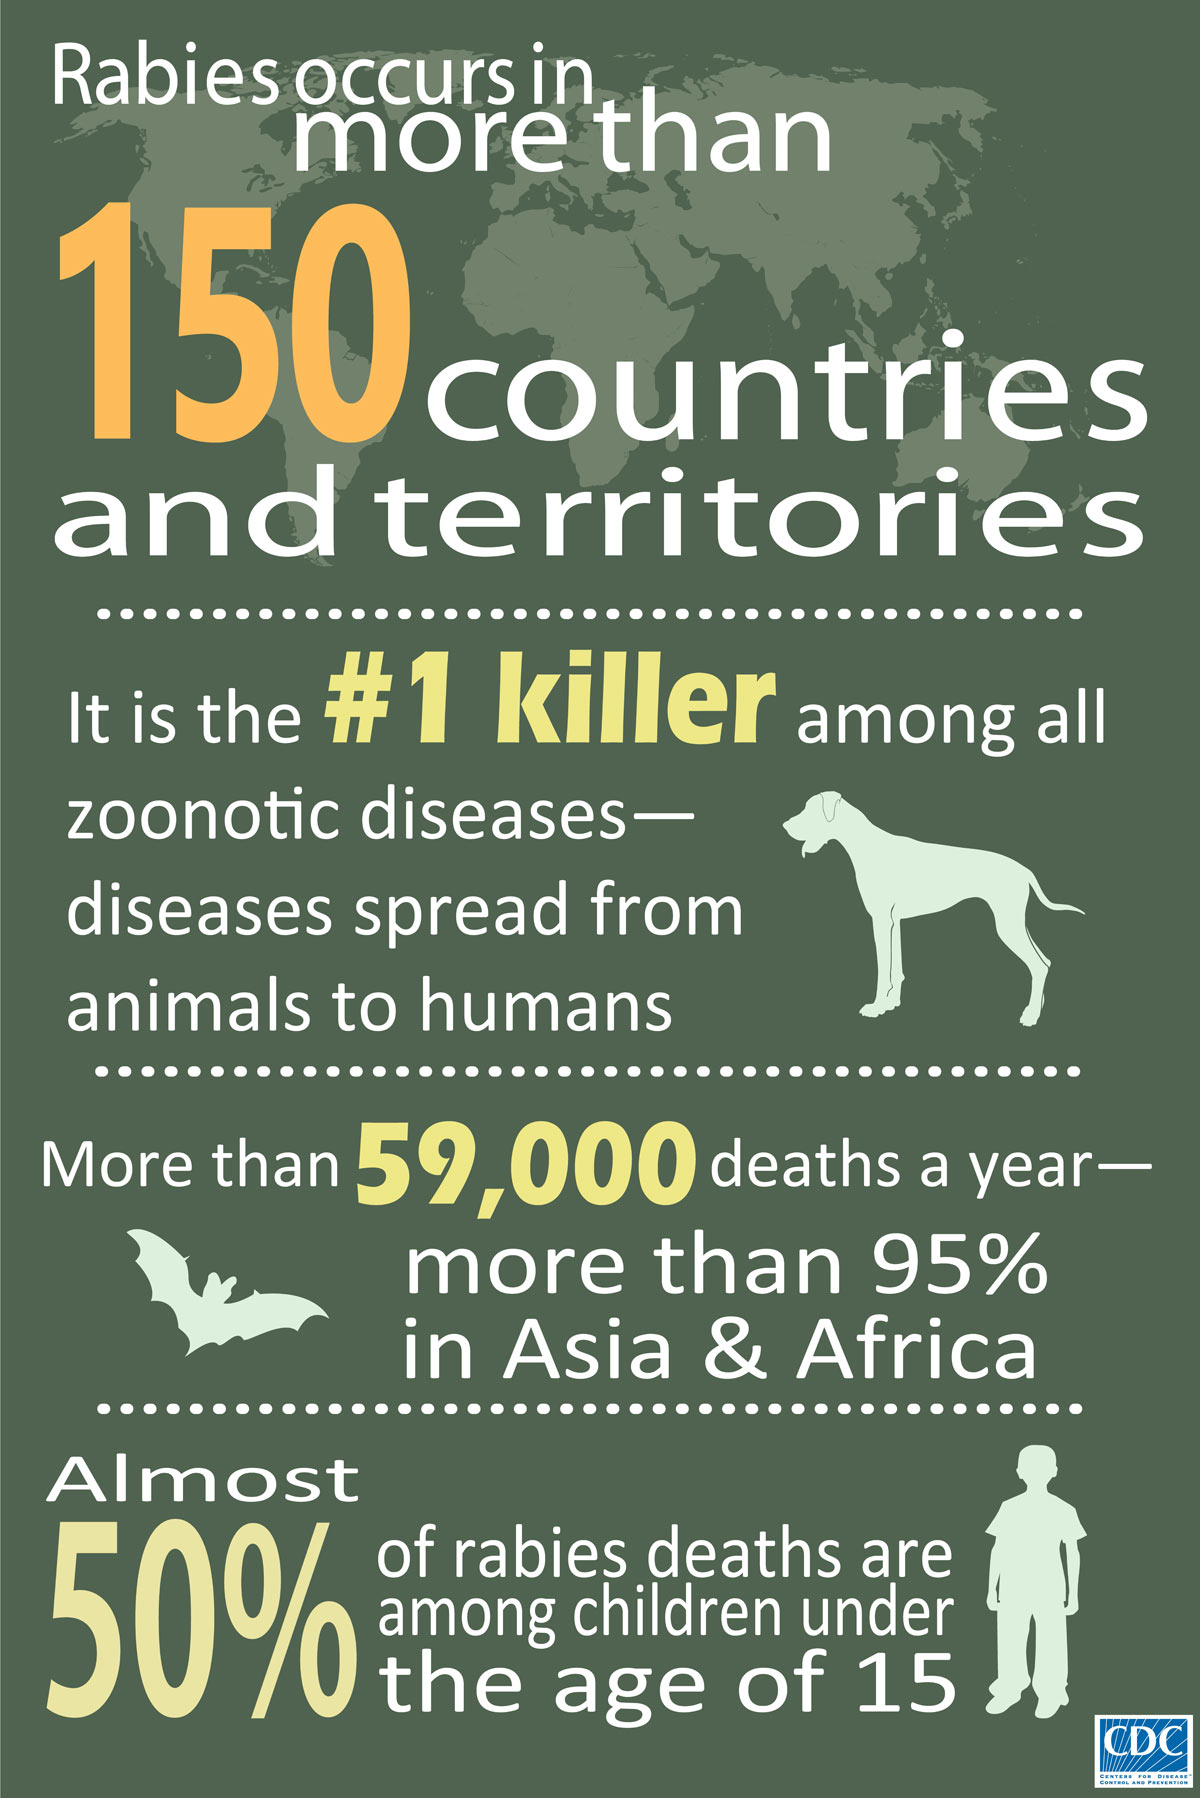 Infographic of the Week: Rabies occur in more than 150 countries and territories. More than 55, 000 deaths a year- more than 95% in Asia & Africa. Almost 50% of rabies deaths are among children under the age of 15.